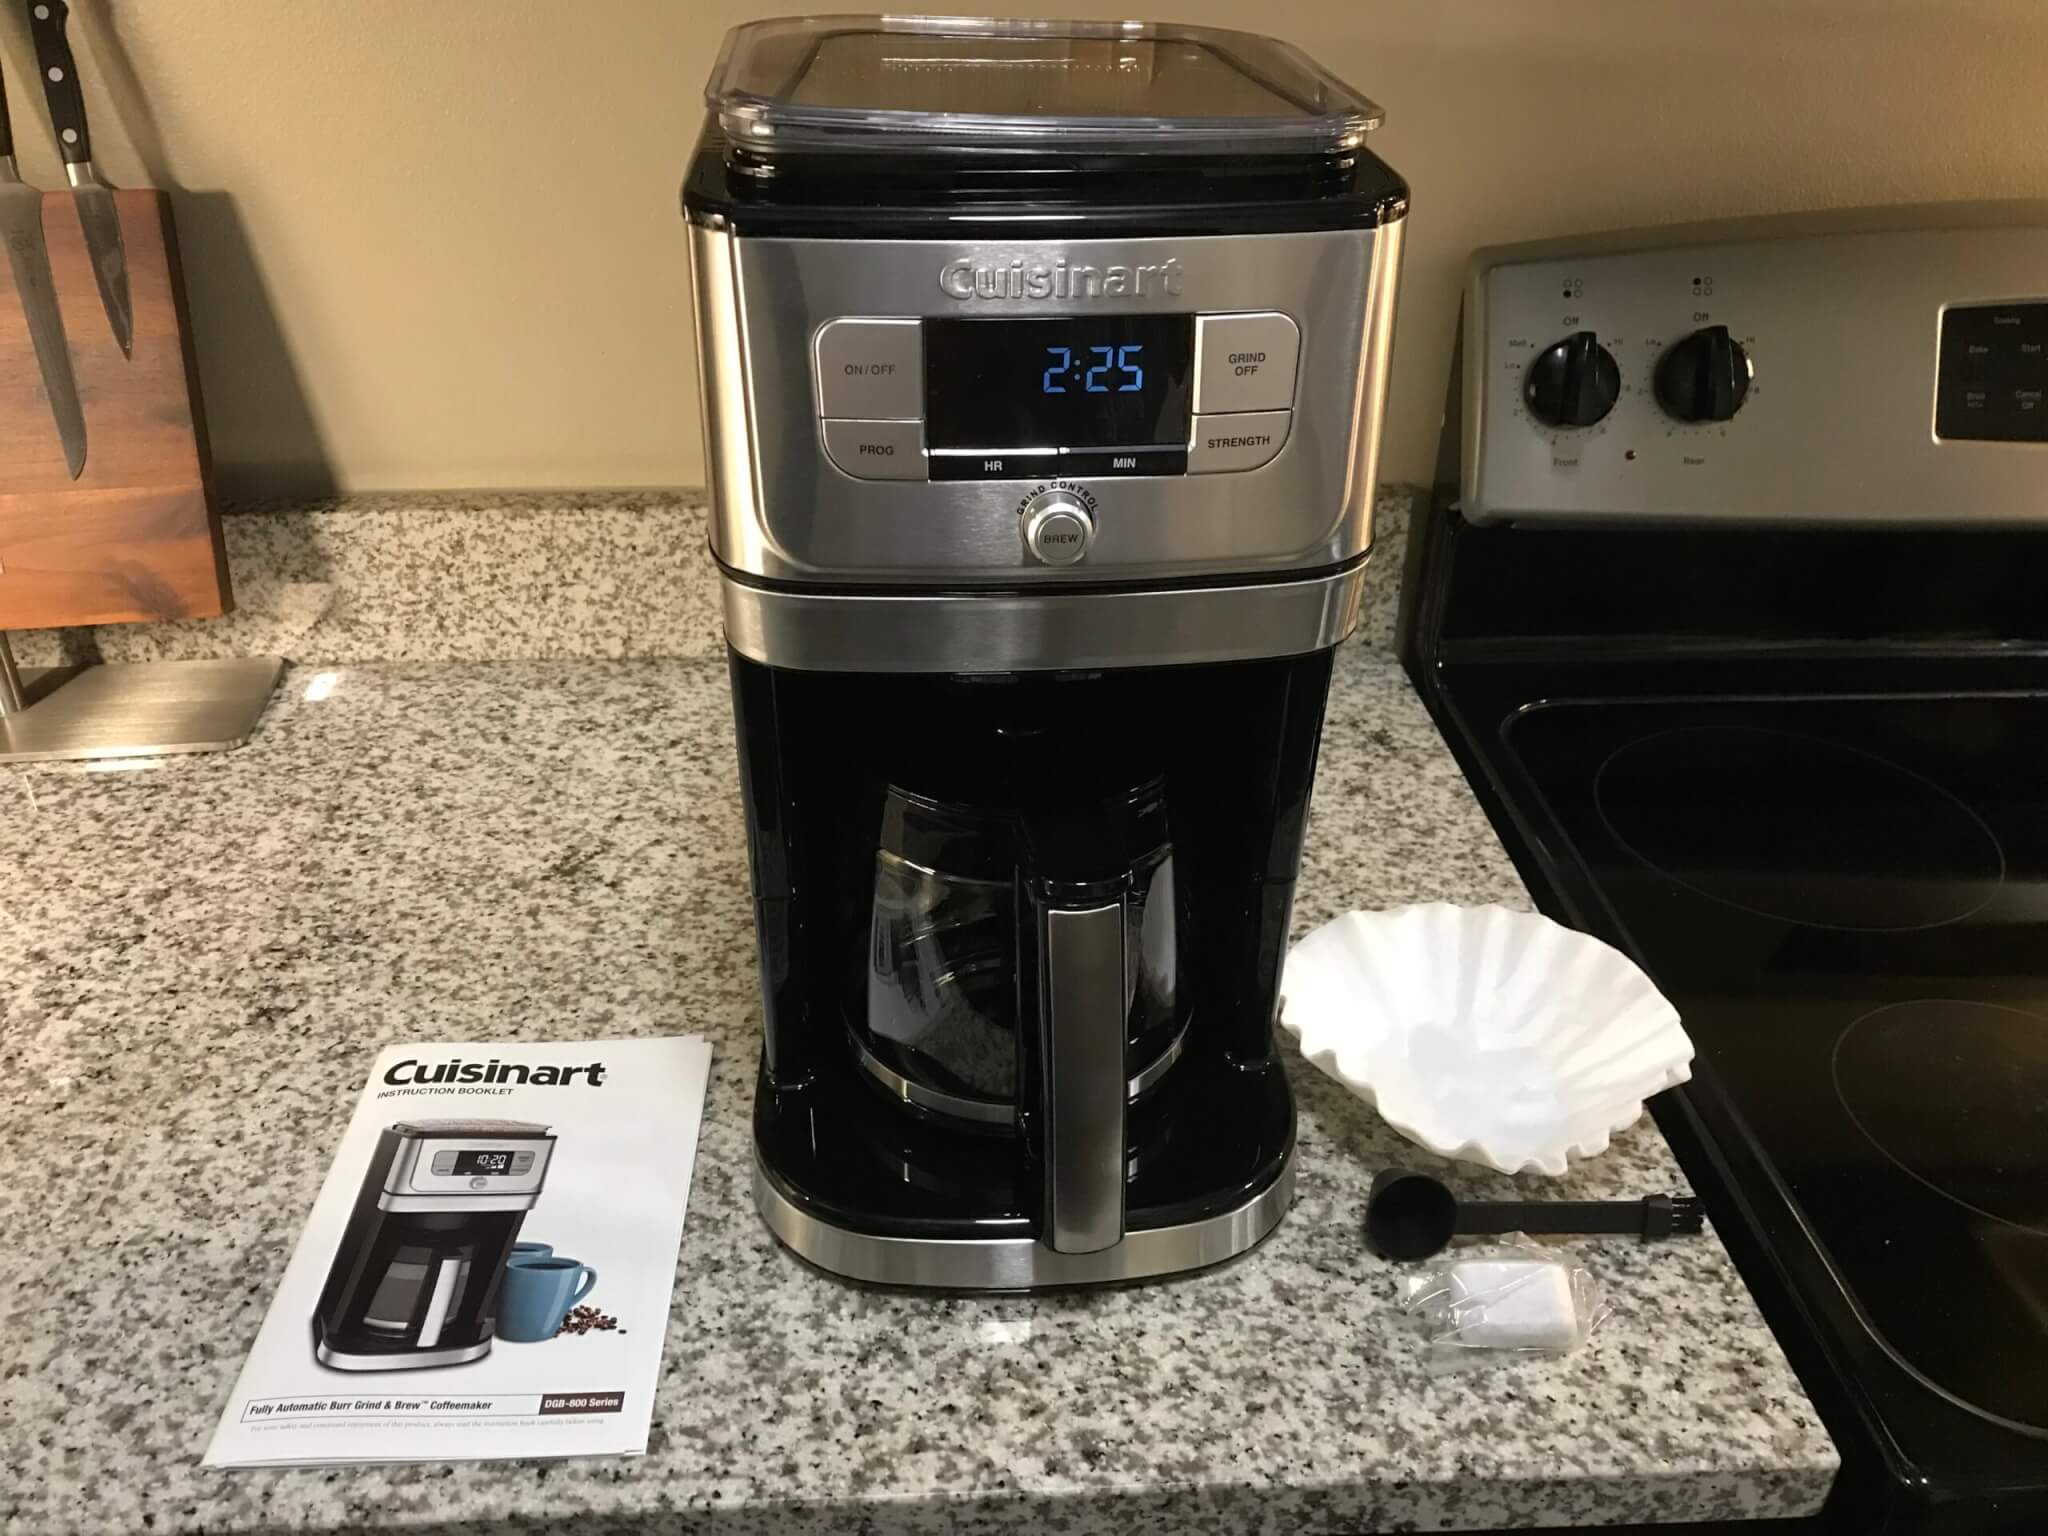 Cuisinart Automatic Burr Grind & Brew Coffee Maker Review: First it Grinds,  Then It Brews - Study Finds